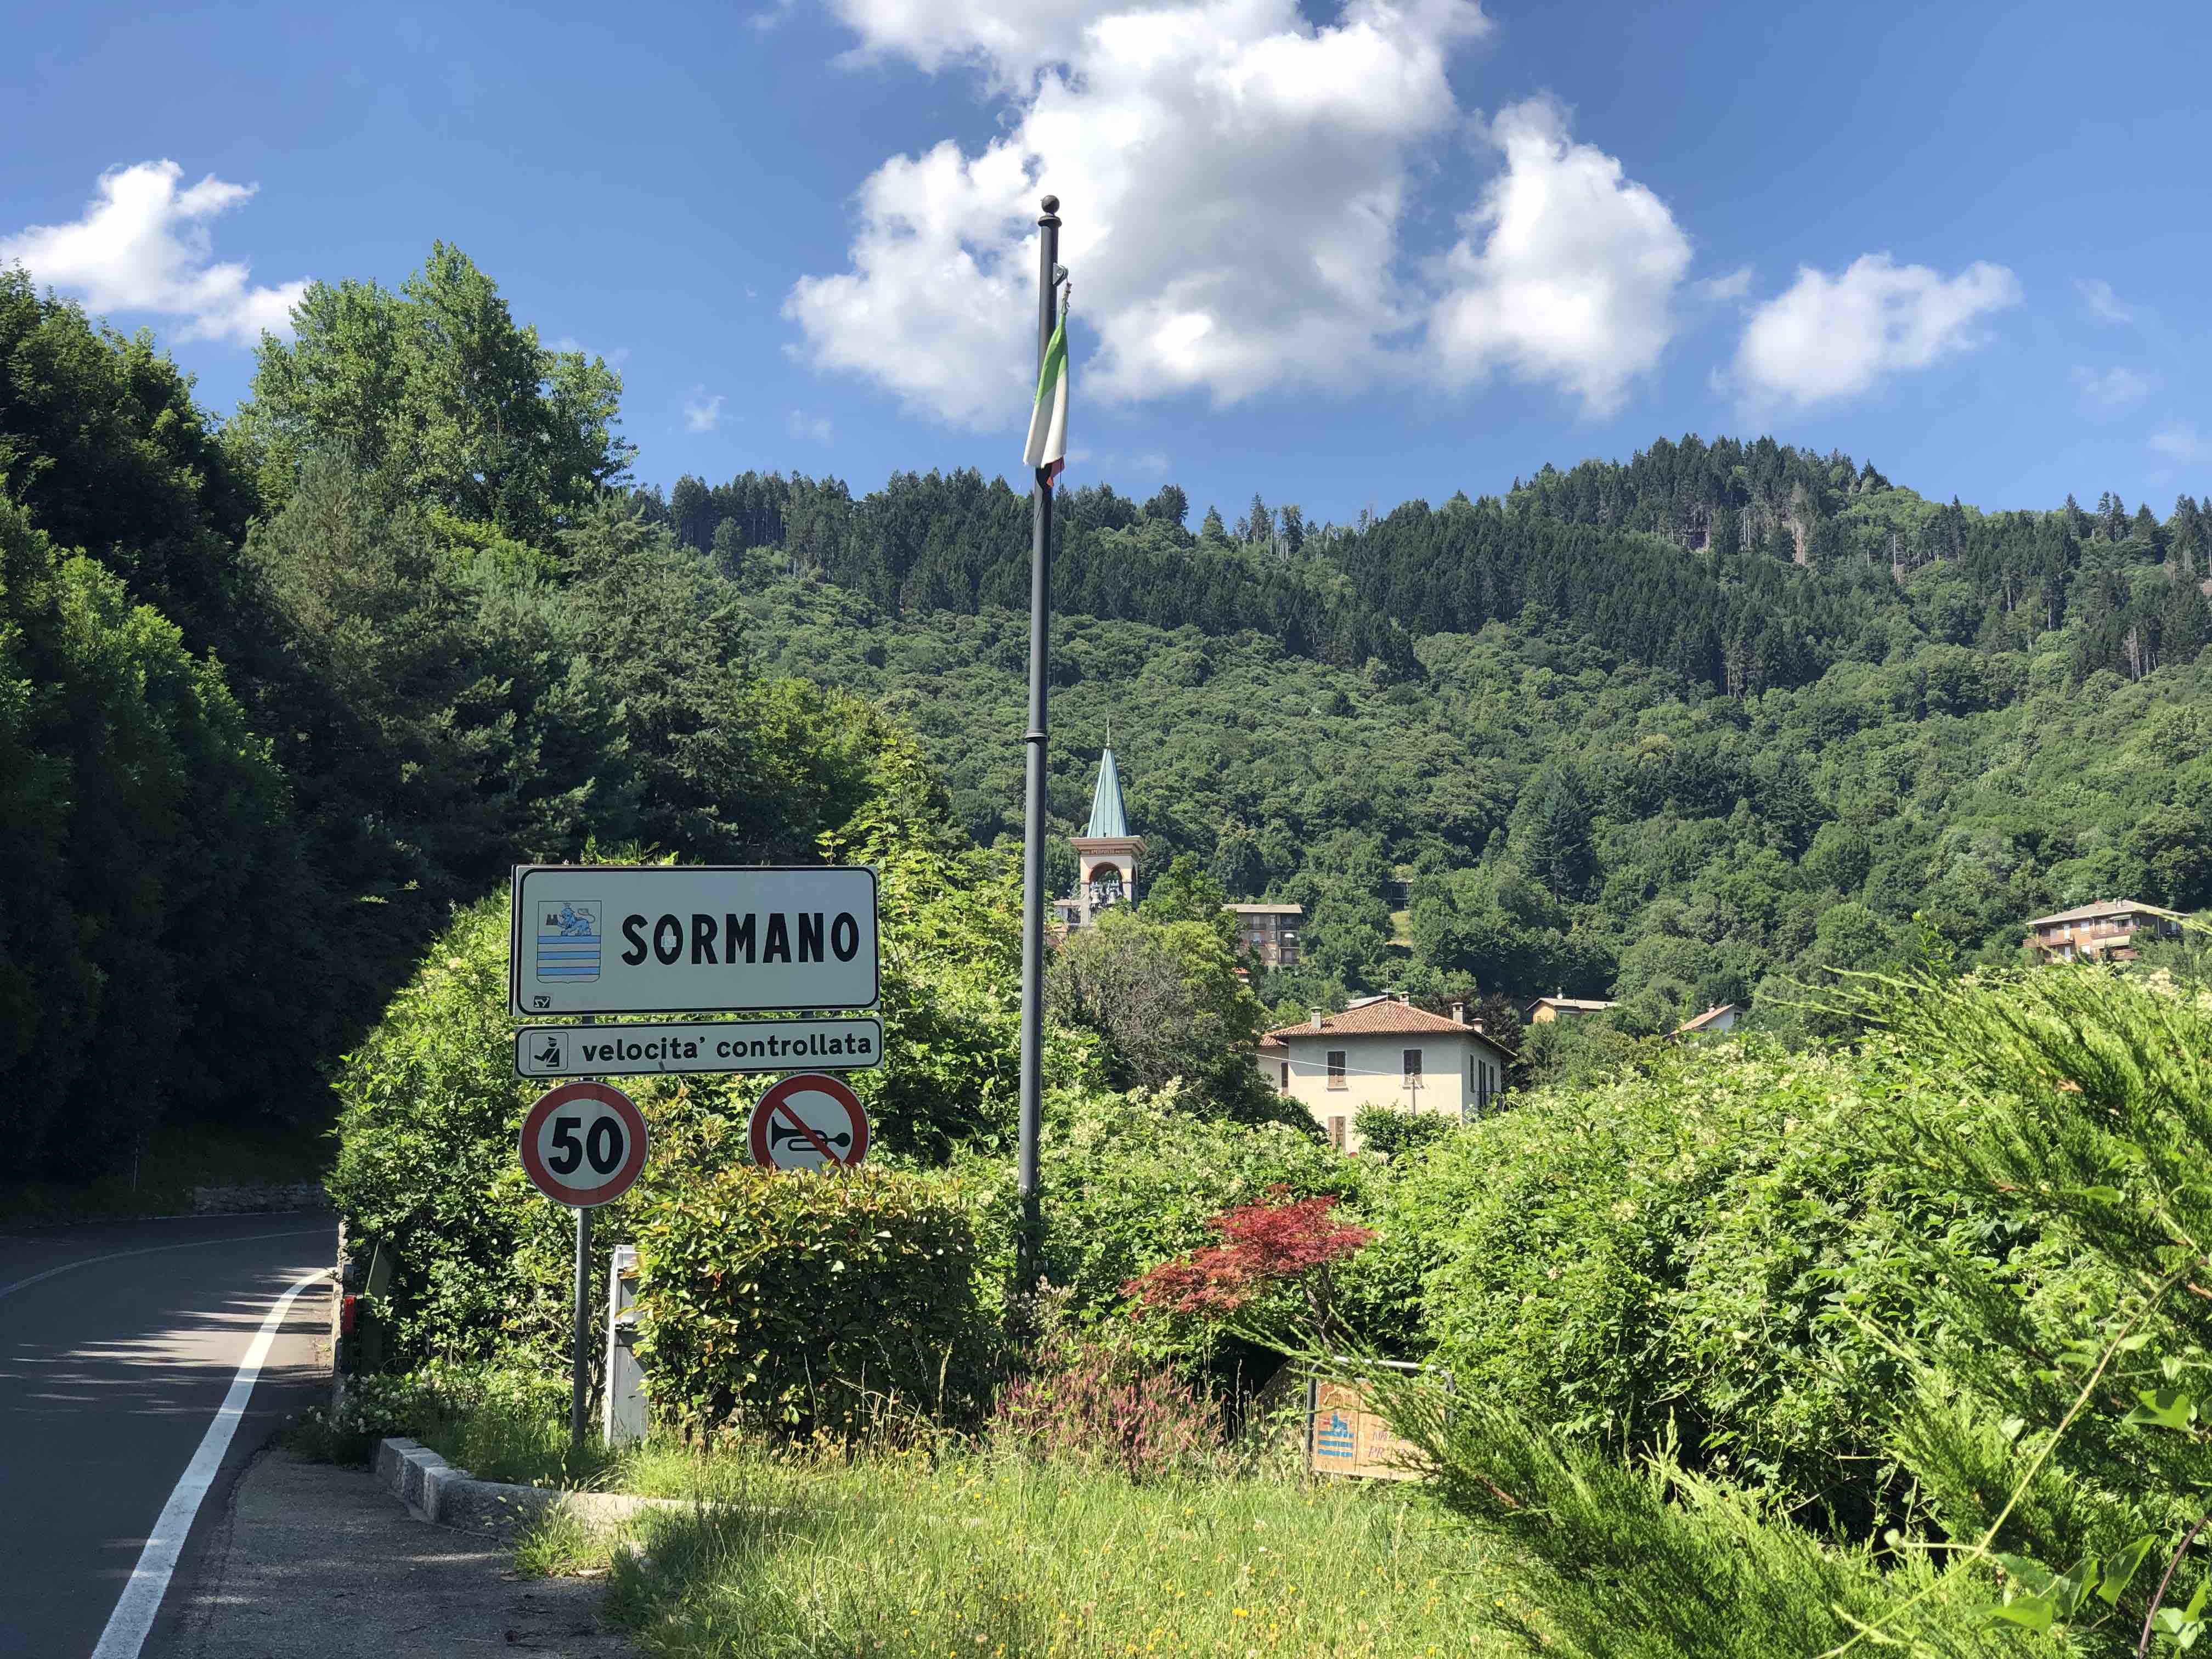 View out over the town of Sormano, Italy with flag pole, green trees, and blue sky with church in the background